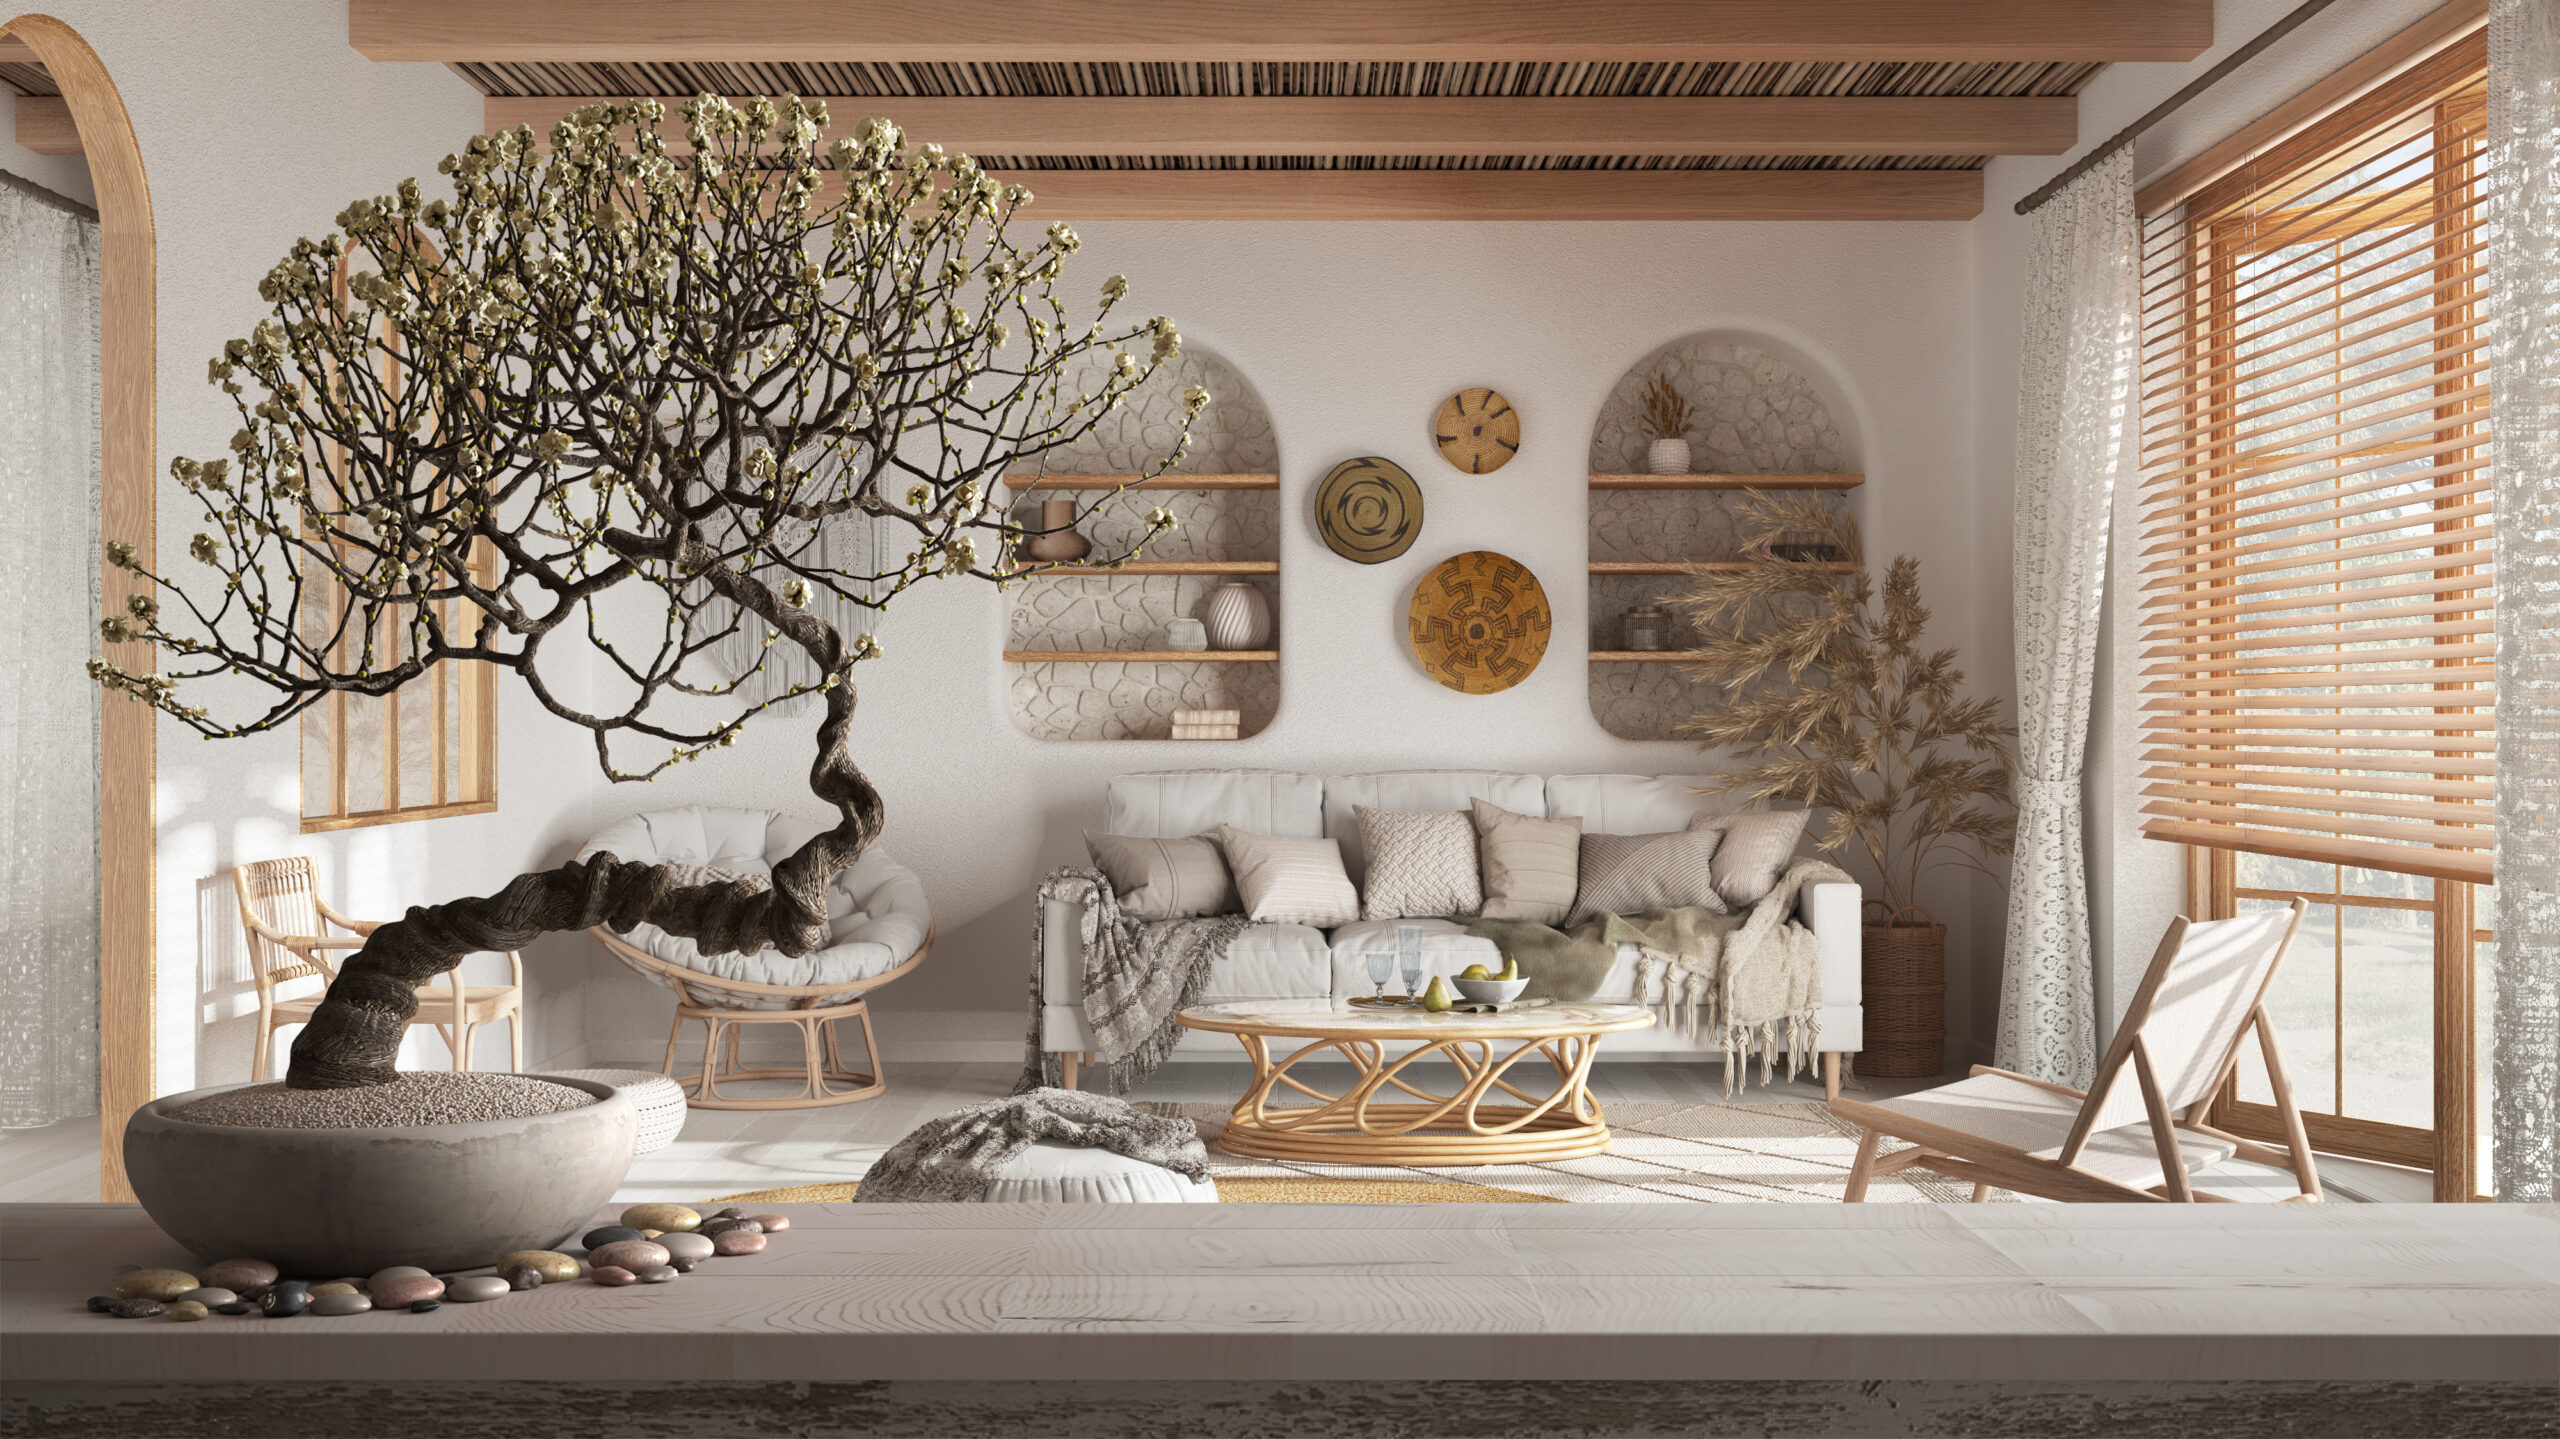 Natural and Rustic Influences for interior design